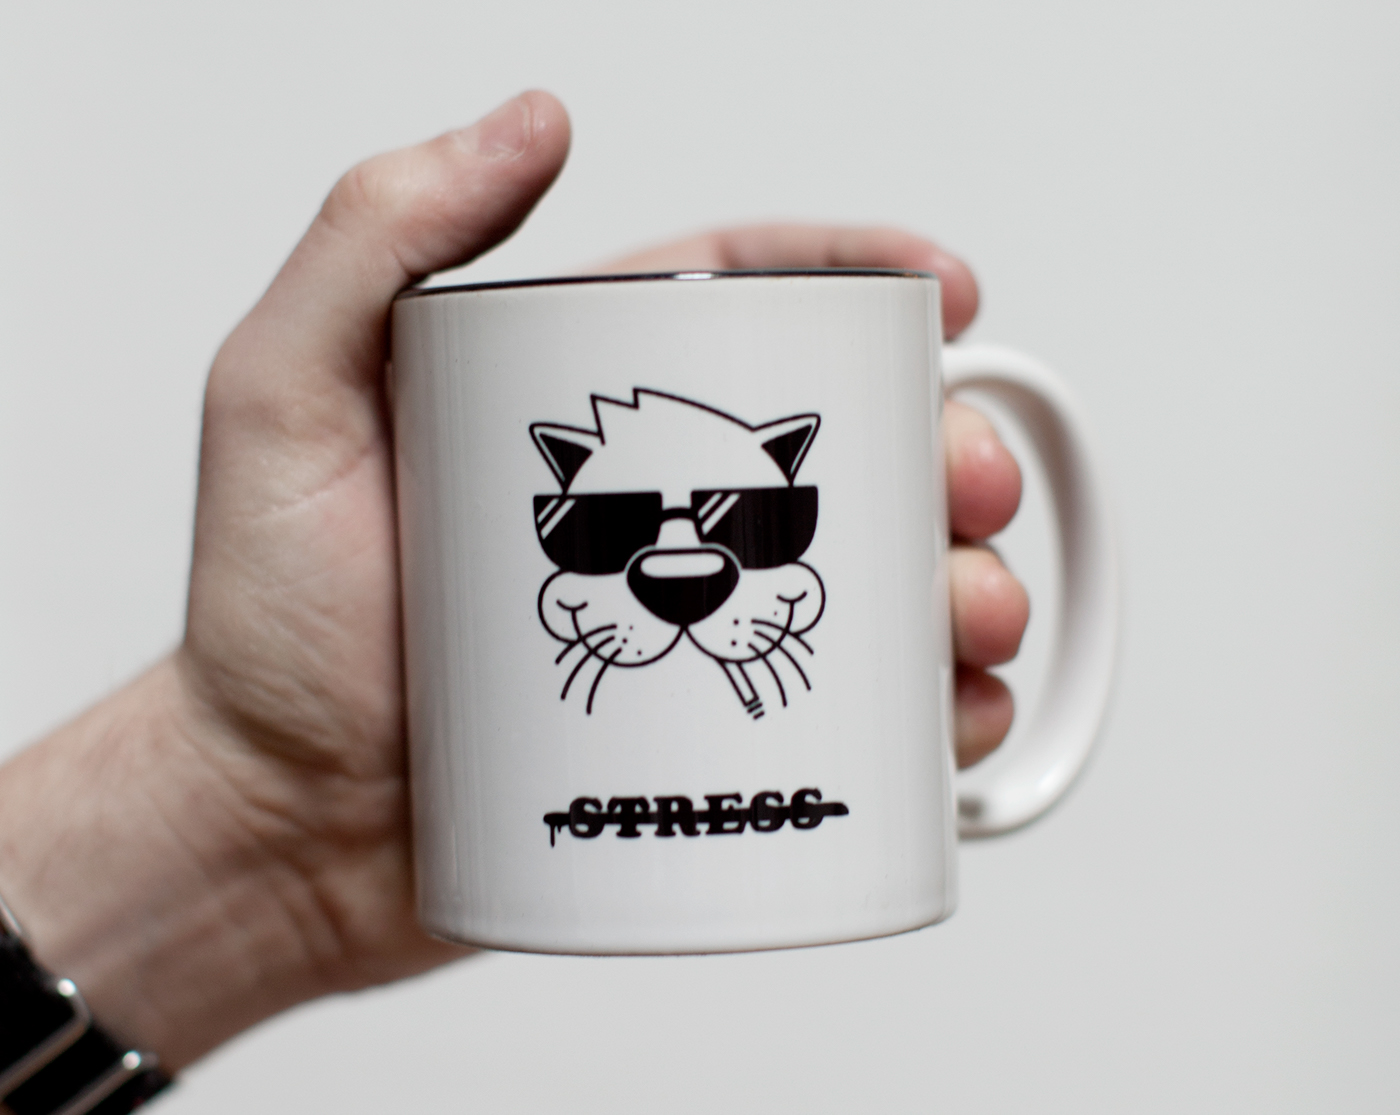 apparel design products product Mugs stickers t-shirt pencil bag Tote cartoon Cat Character illustrate